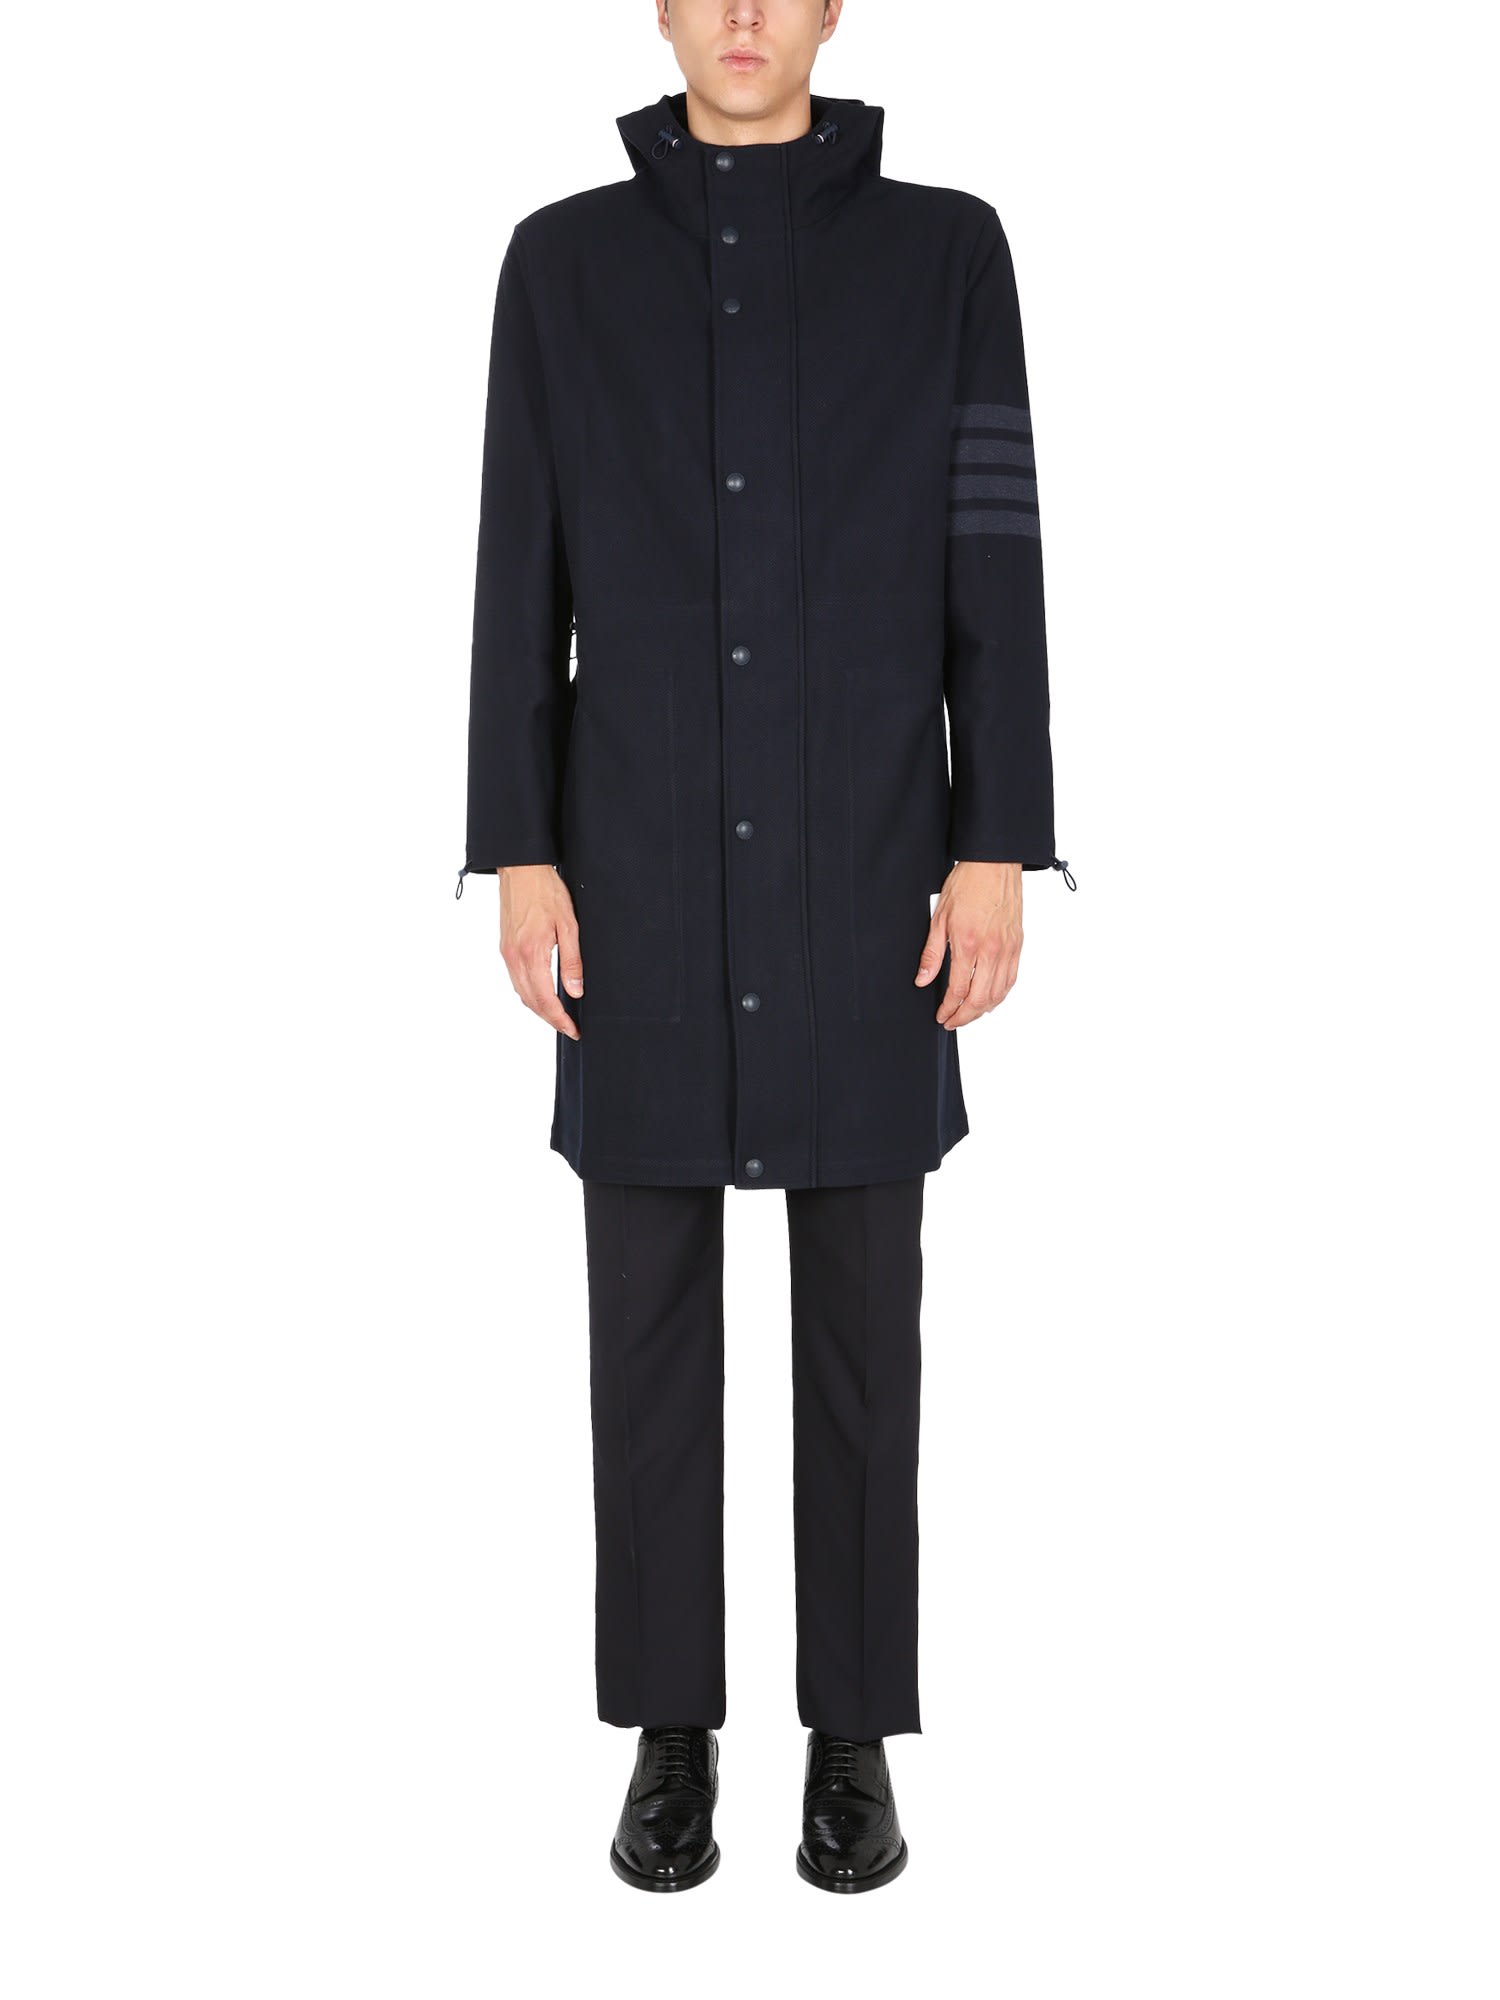 Thom Browne Technical Cotton Twill Parka